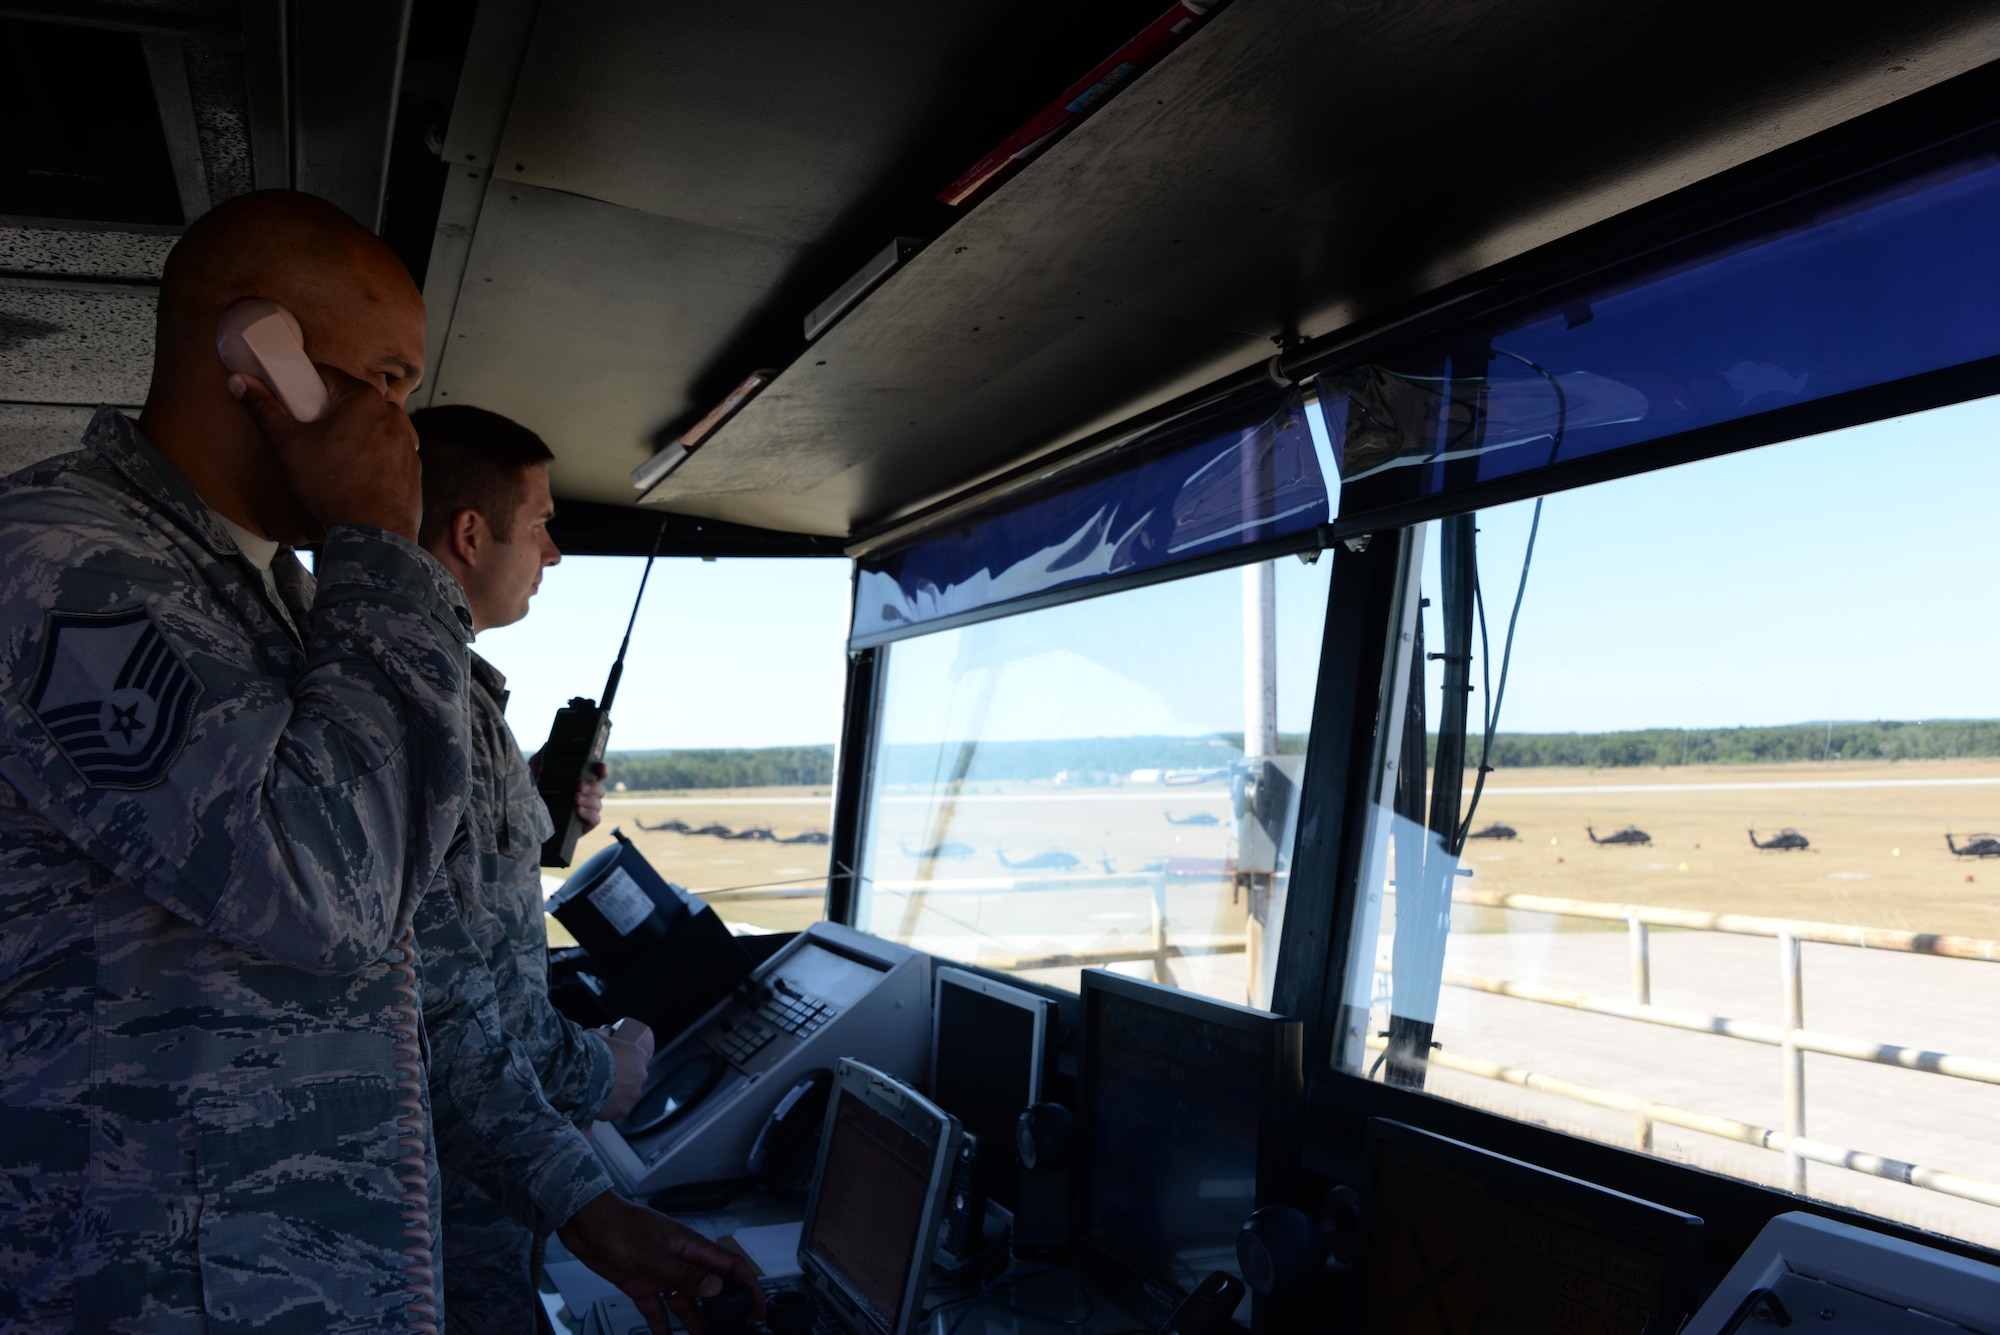 Master Sgt. Greylynn Carr and Master Sgt. Bradley Rich, 821st Contingency Response Squadron air traffic control craftsmen, watch the skies and the flightline from the tower at Grayling Army Airfield, Michigan, Aug. 8, 2016. Both Carr and Rich are stationed at Travis Air Force Base, California, and were in Michigan as part of Exercise Northern Strike. Exercise Northern Strike is a large-scale exercise coordinated by the Michigan Army National Guard and features Army, Marines and Air Force working together for total force integration. (U.S. Air Force photo by Senior Airman Amber Carter)